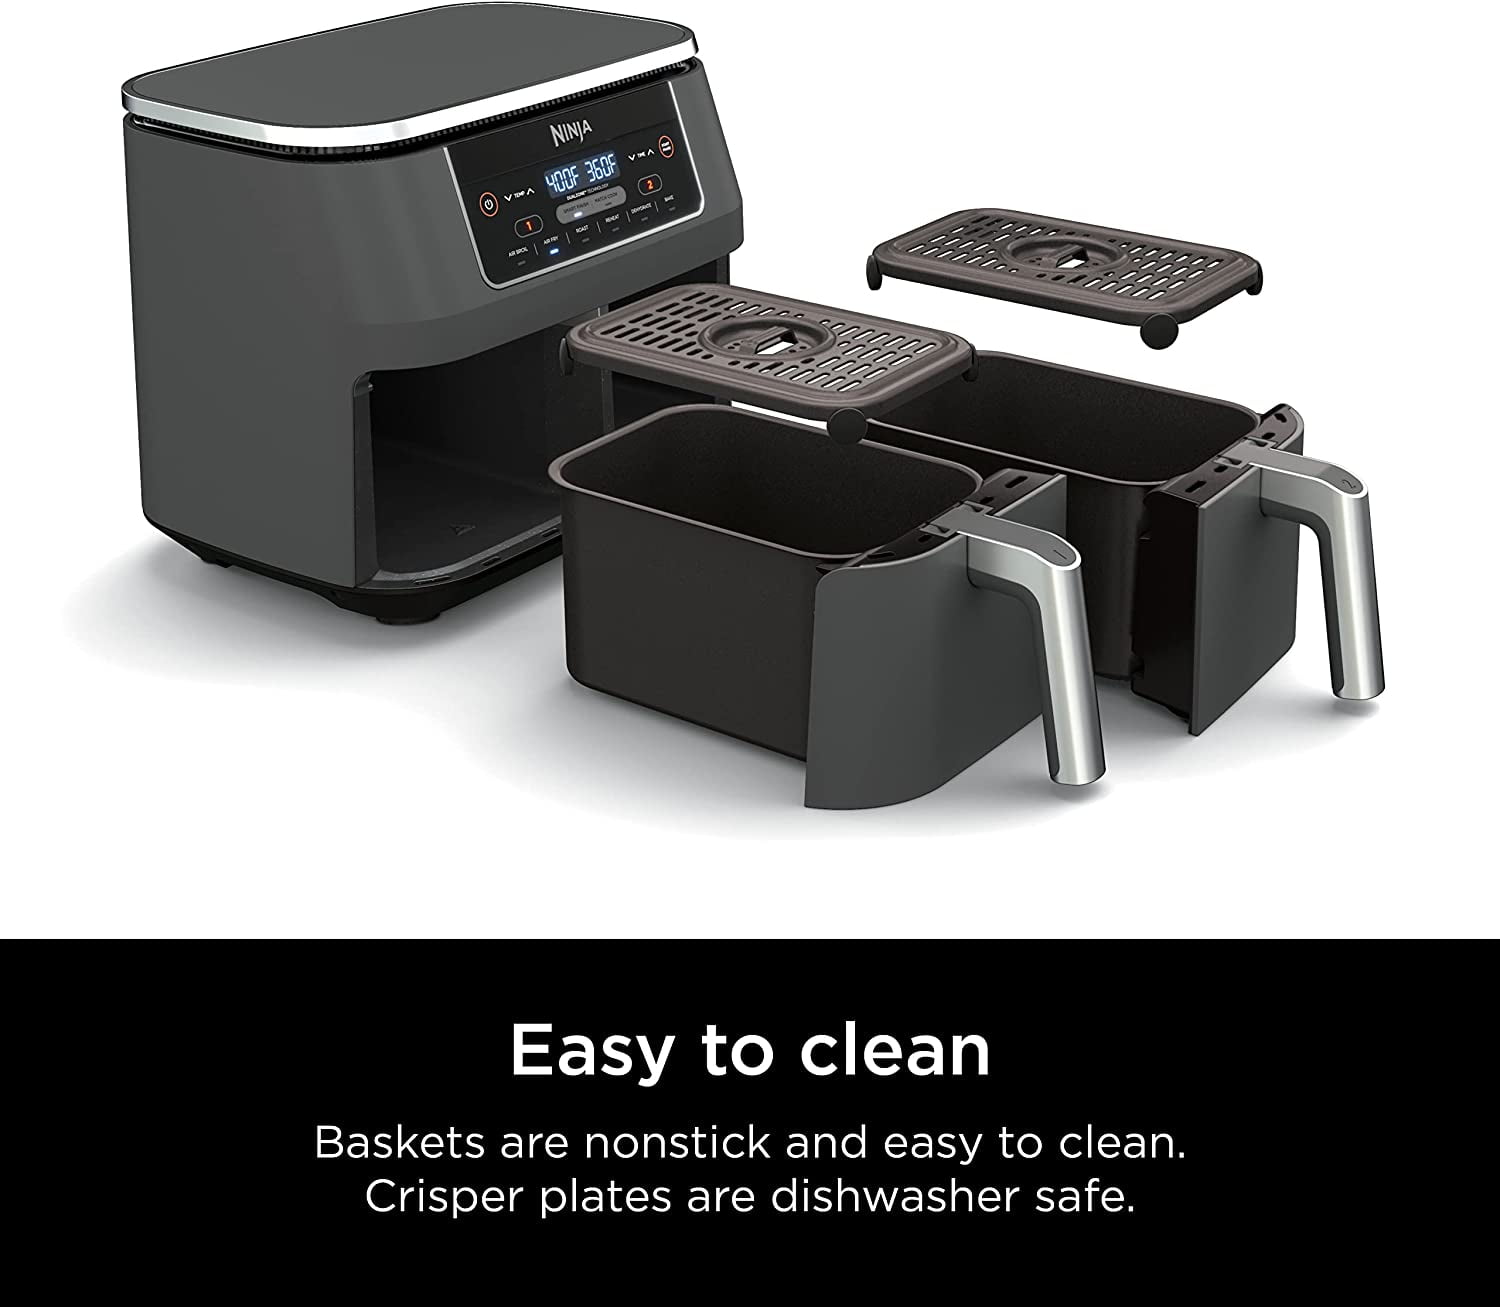  Air Fryer, 8 Quart Dual Zone Air Fryers Oilless Cooker with 2  Independent Nonstick Frying Baskets, 6-in-1 Cooking Functions Airfryer,  Black : Home & Kitchen